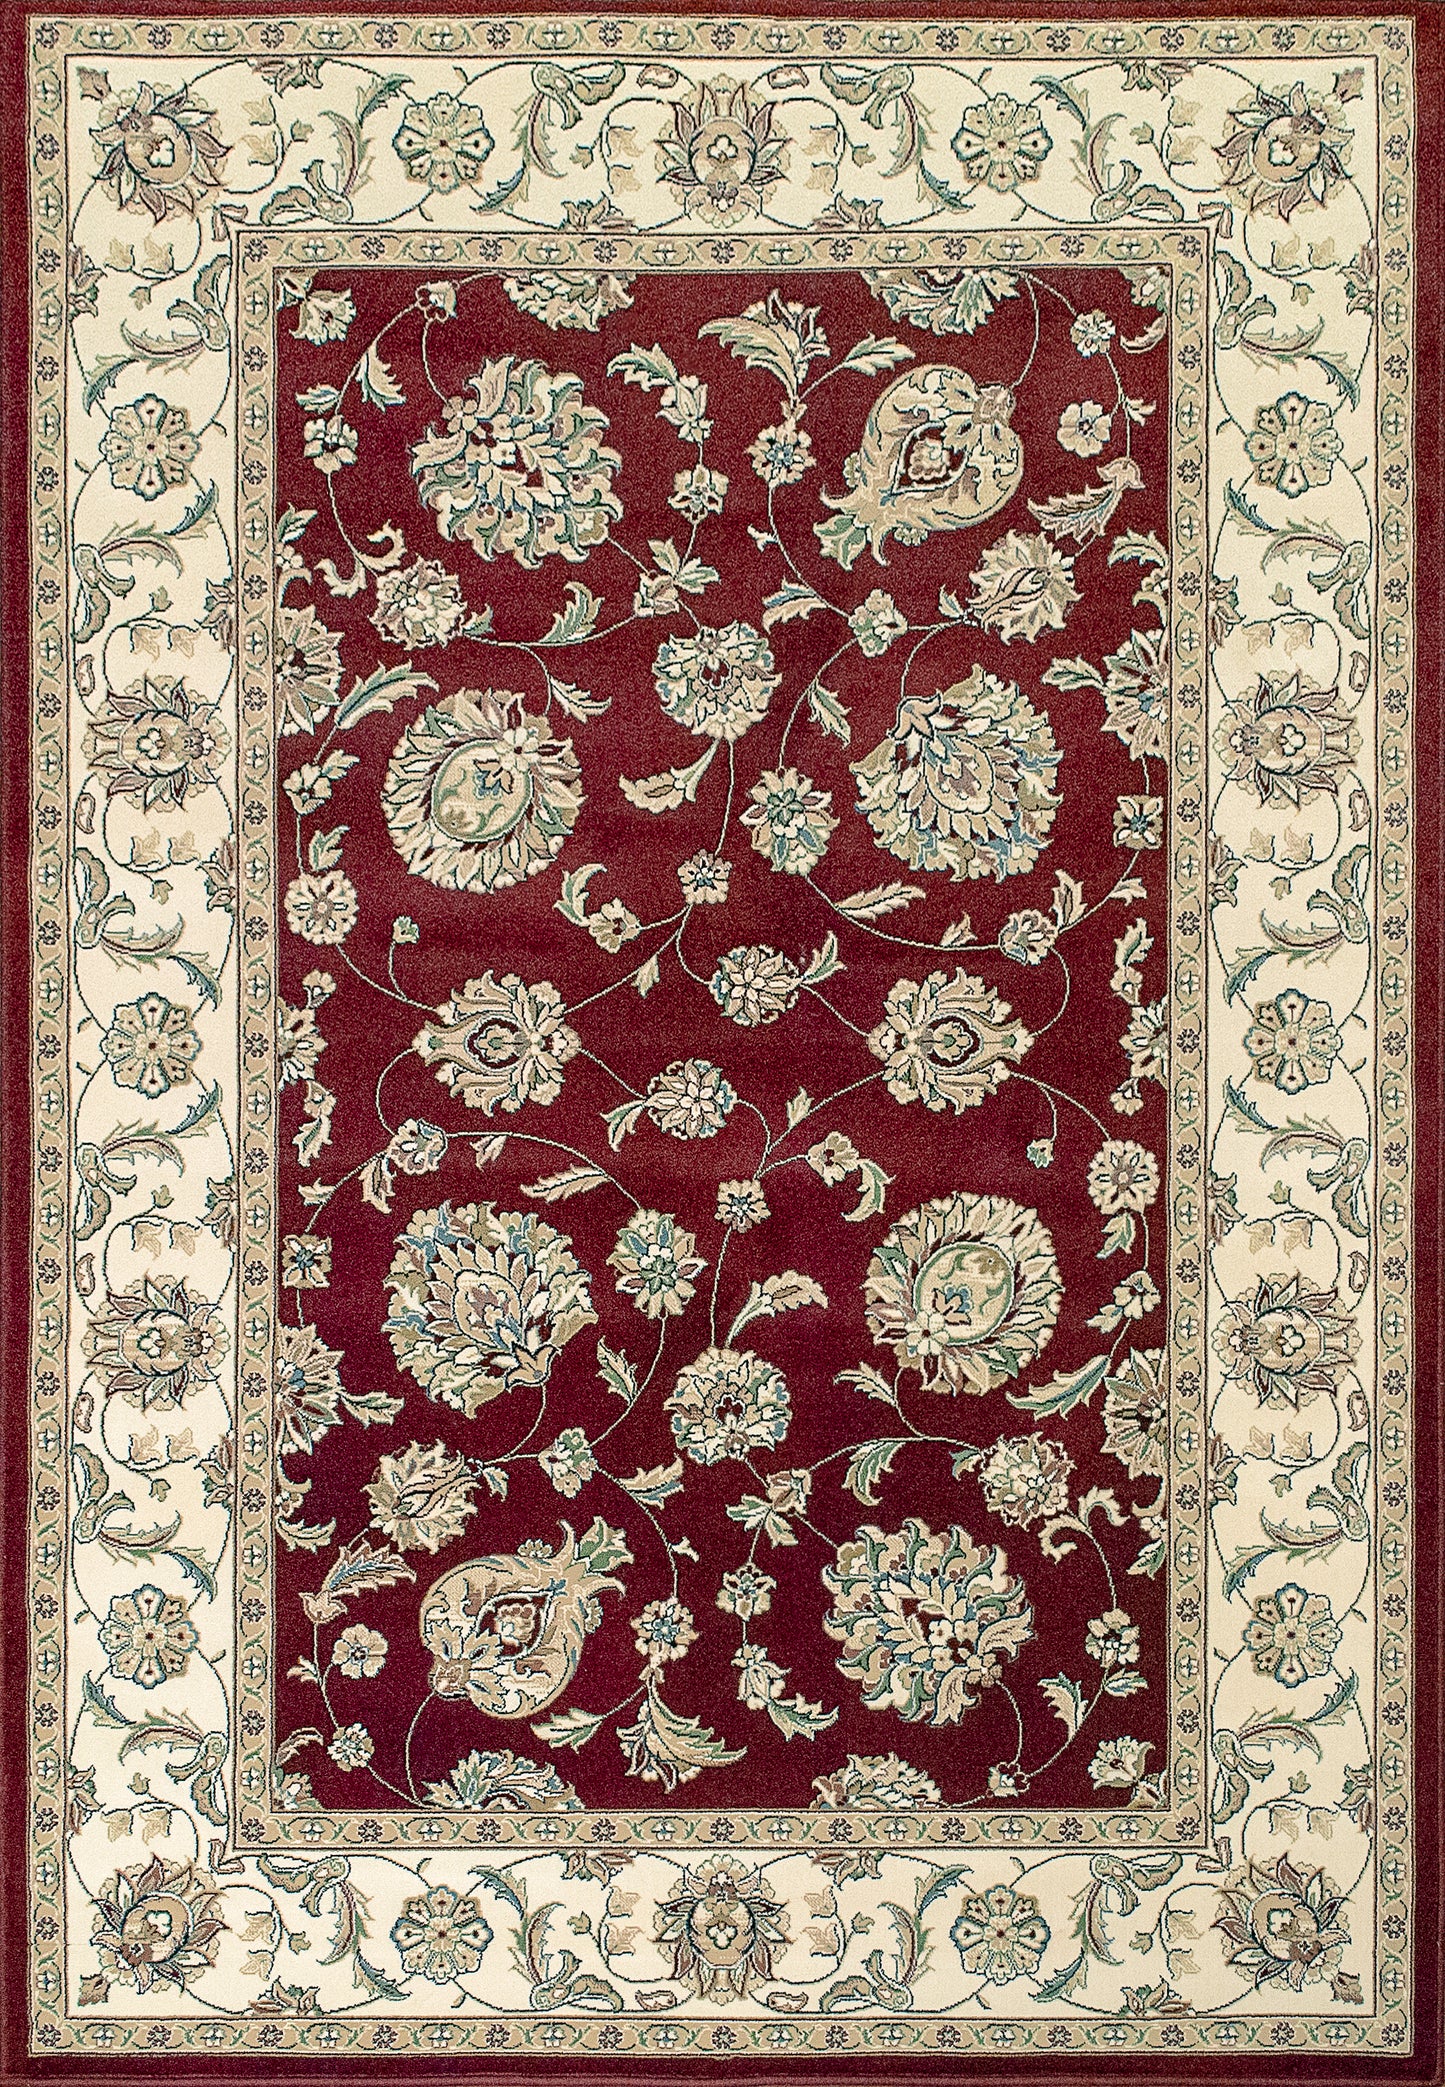 Ancient Garden 57365-1464 Red/Ivory Area Rug